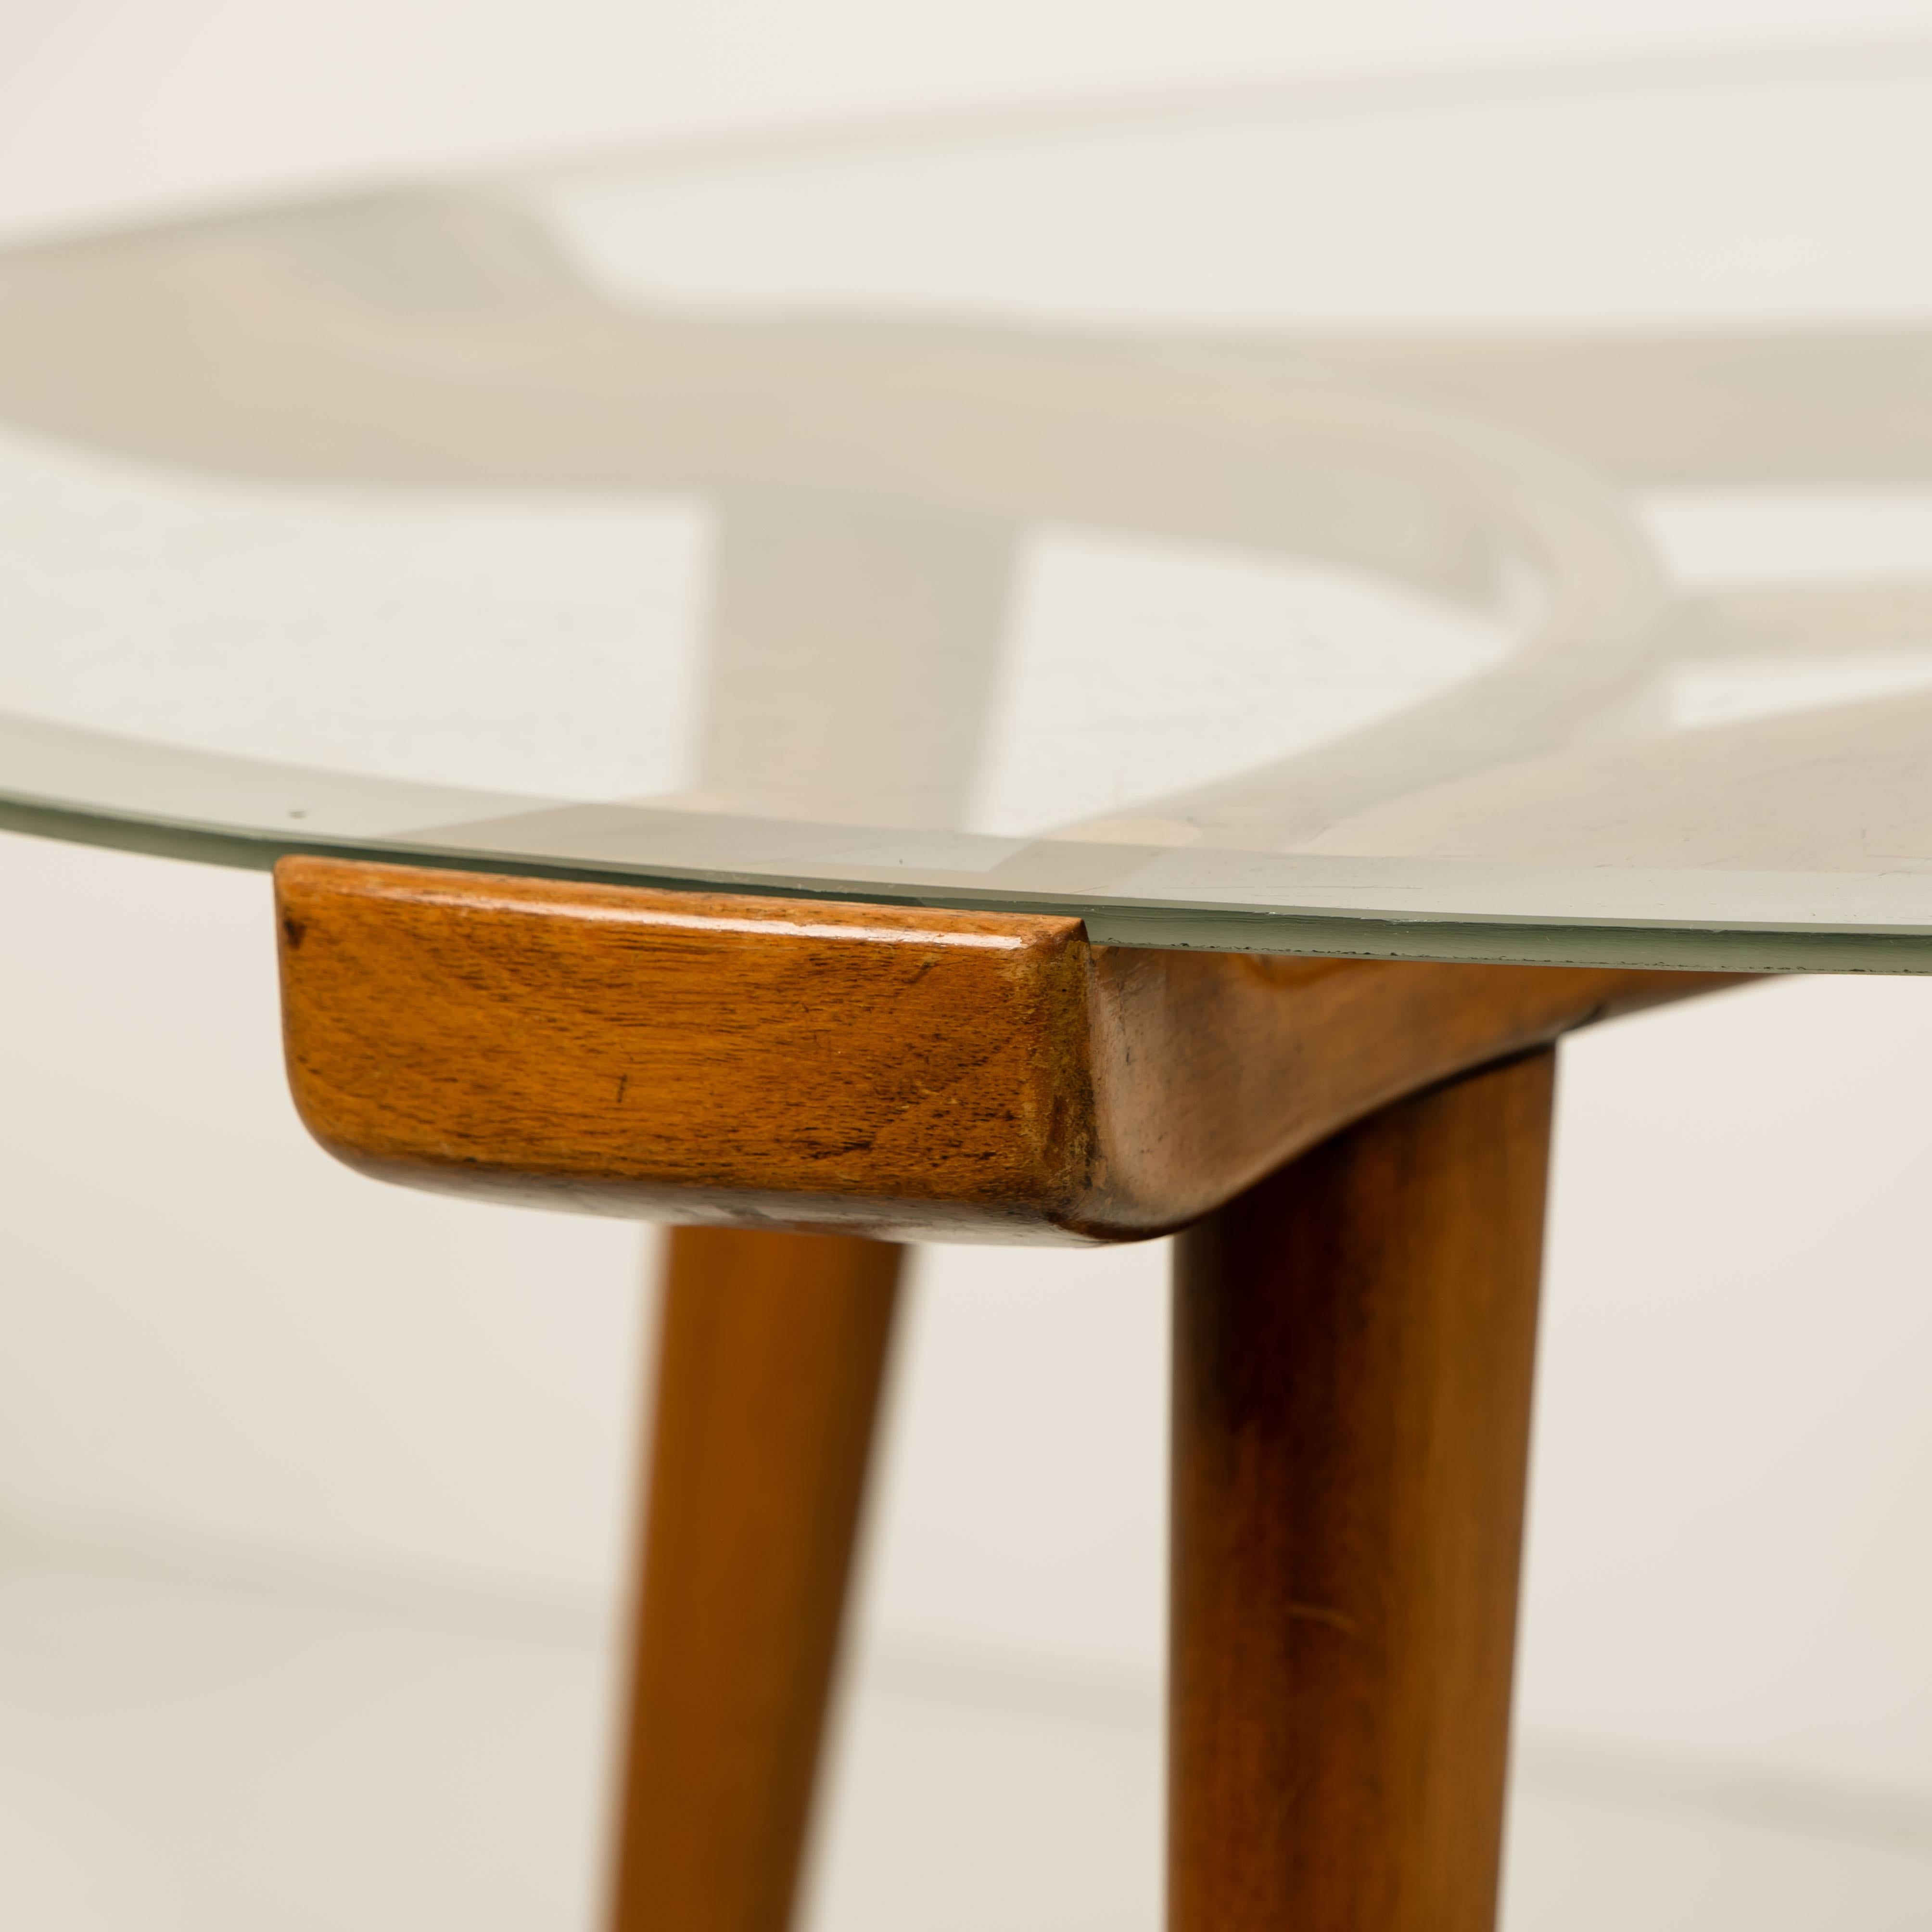 Solid Brass Walnut Glass Table, by William Watting, Produced by Fristho, 1950s For Sale 2